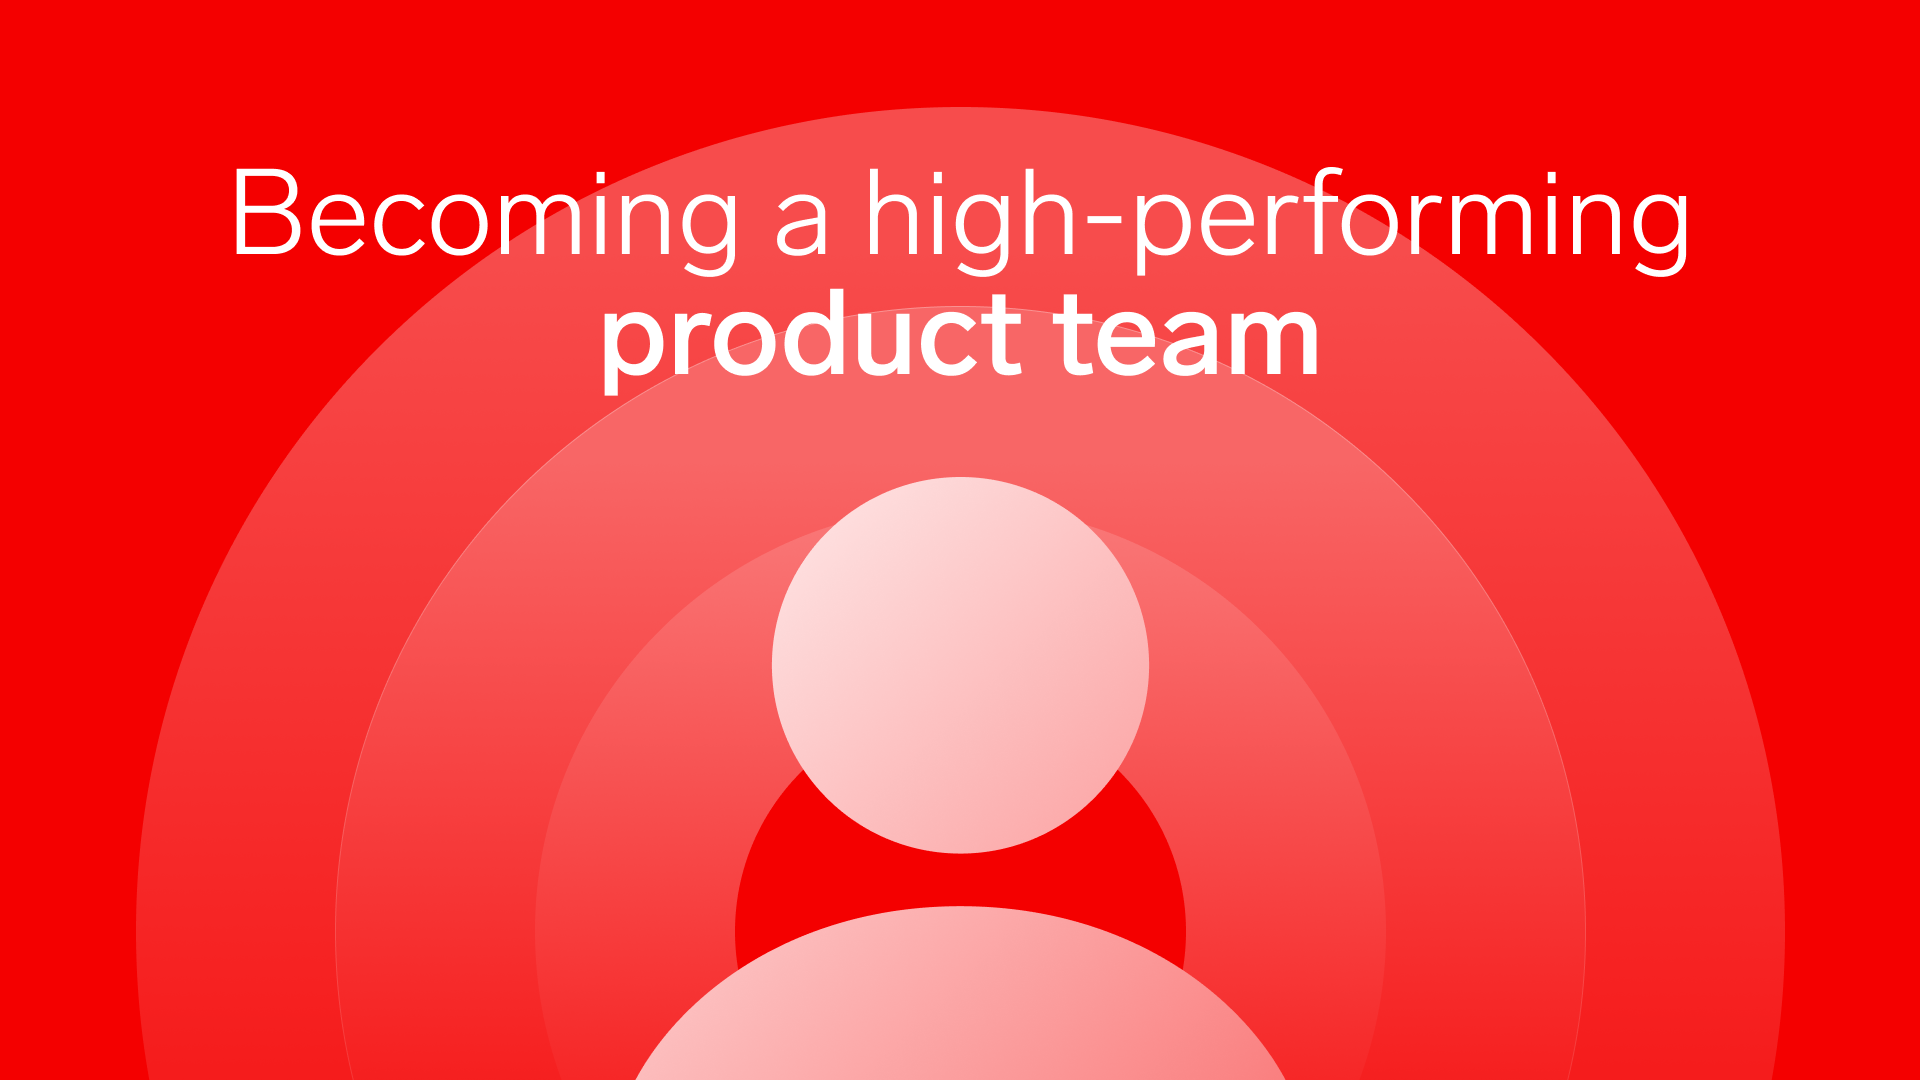 The key to becoming a high-performing product team